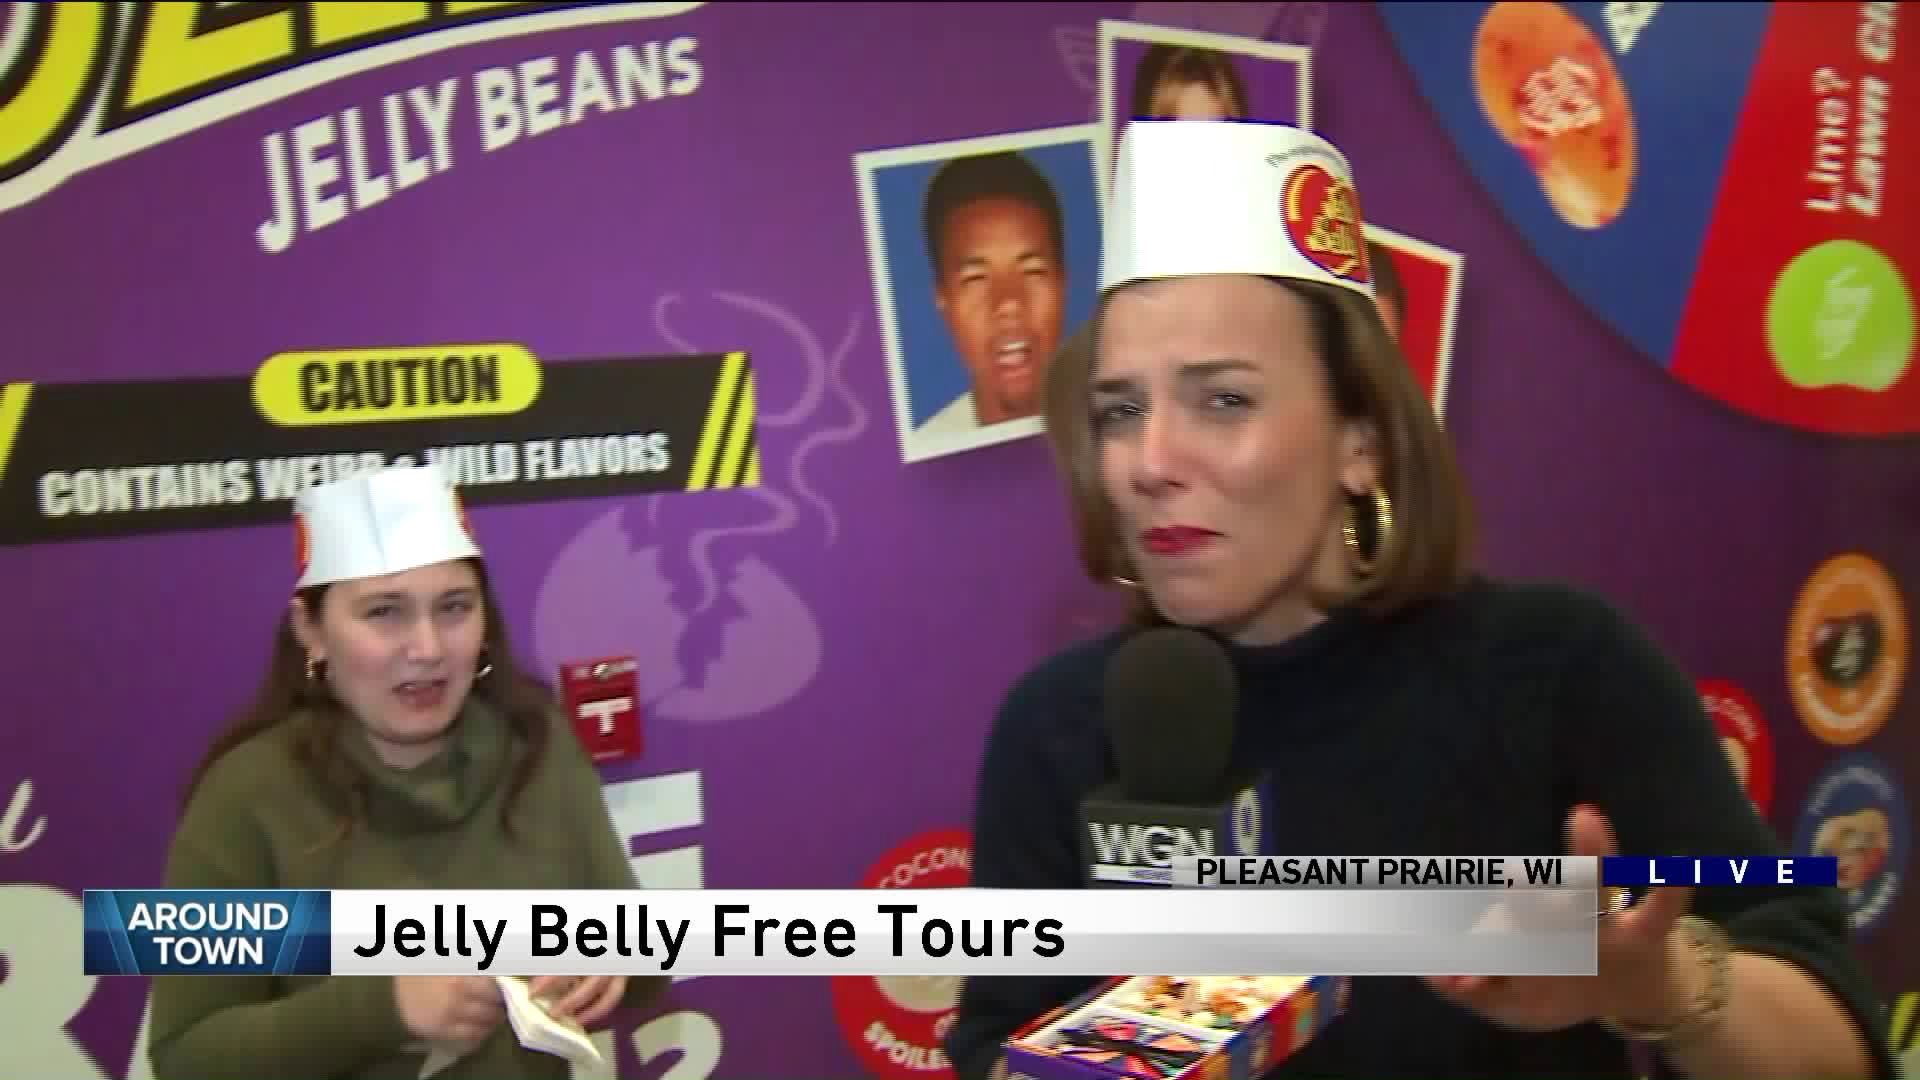 Around Town tours the Jelly Belly Visitor Center